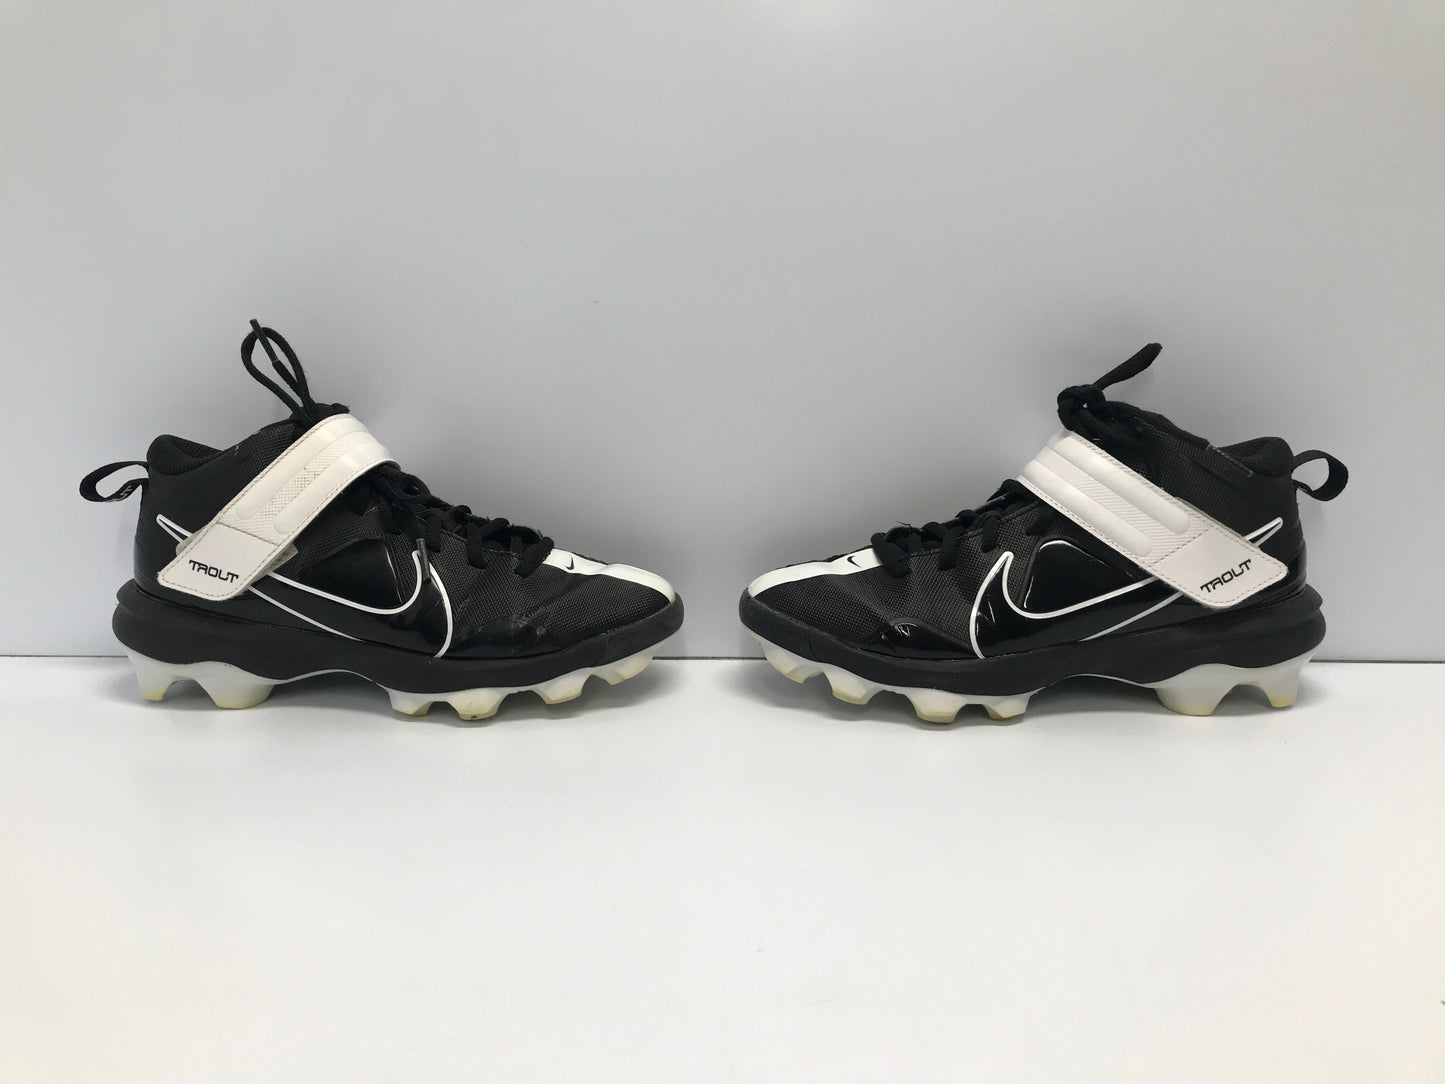 Baseball Shoes Cleats Child Size 5.5 Youth Nike Trout Black White Excellent